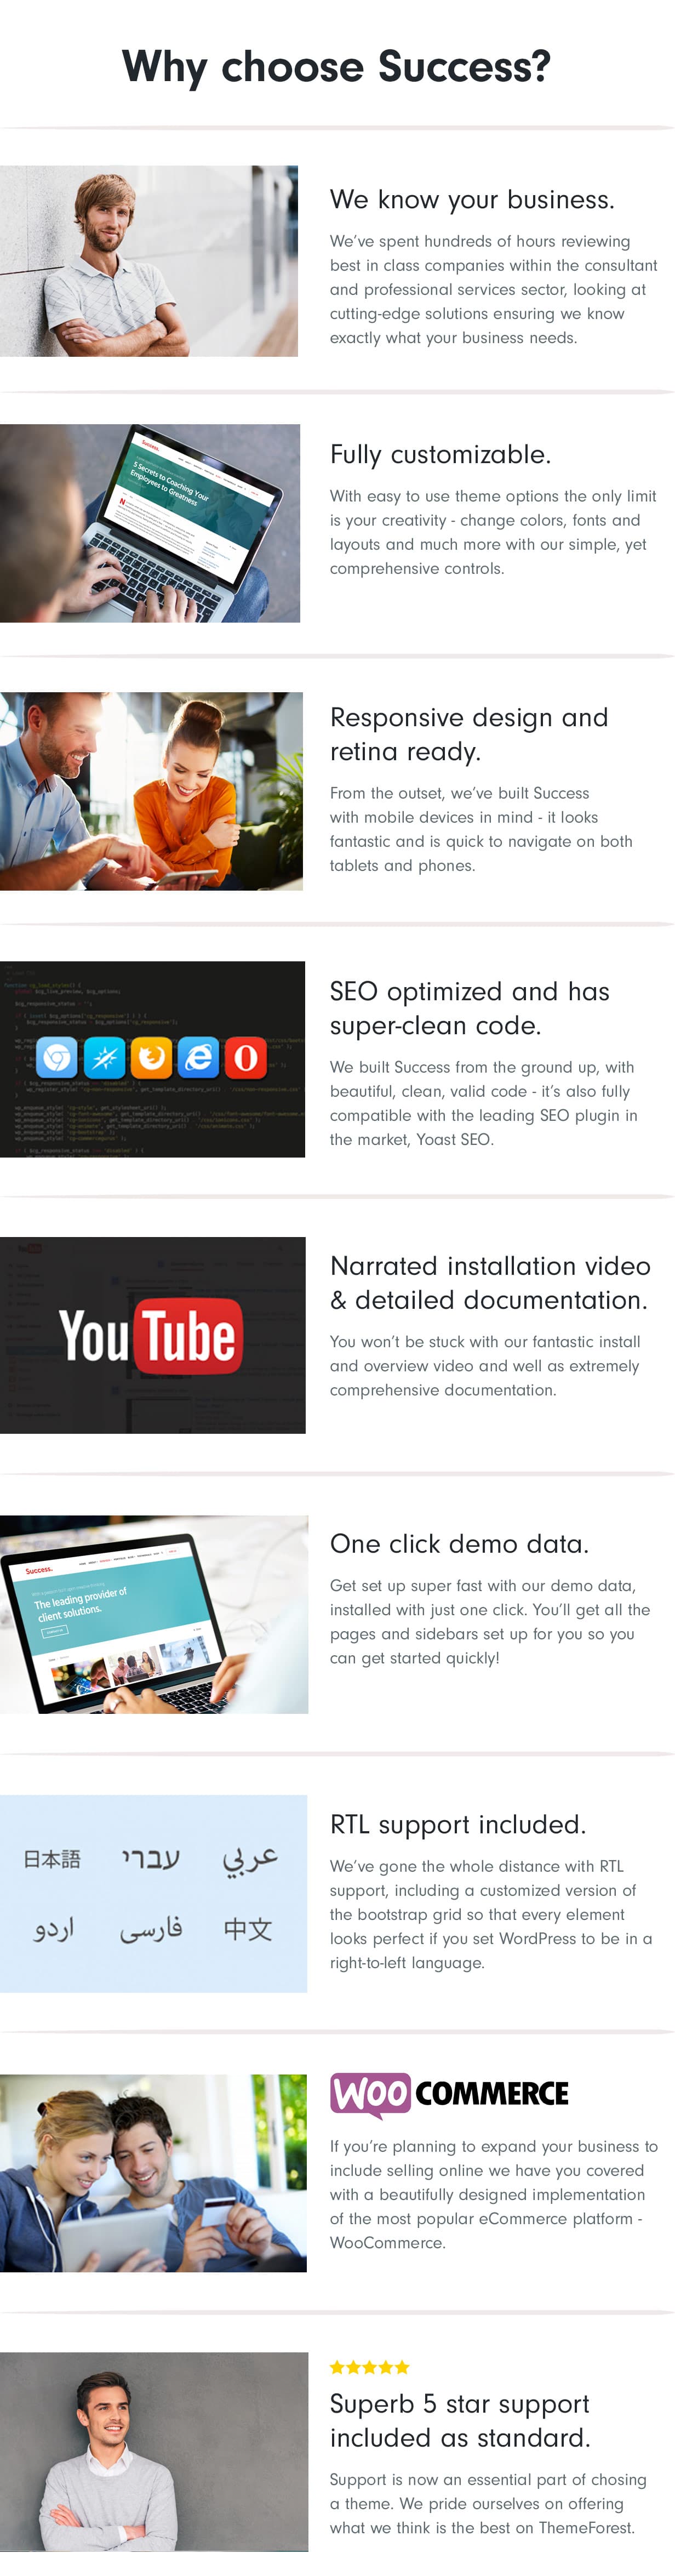 features - Success - Business and Professional Services WordPress Theme